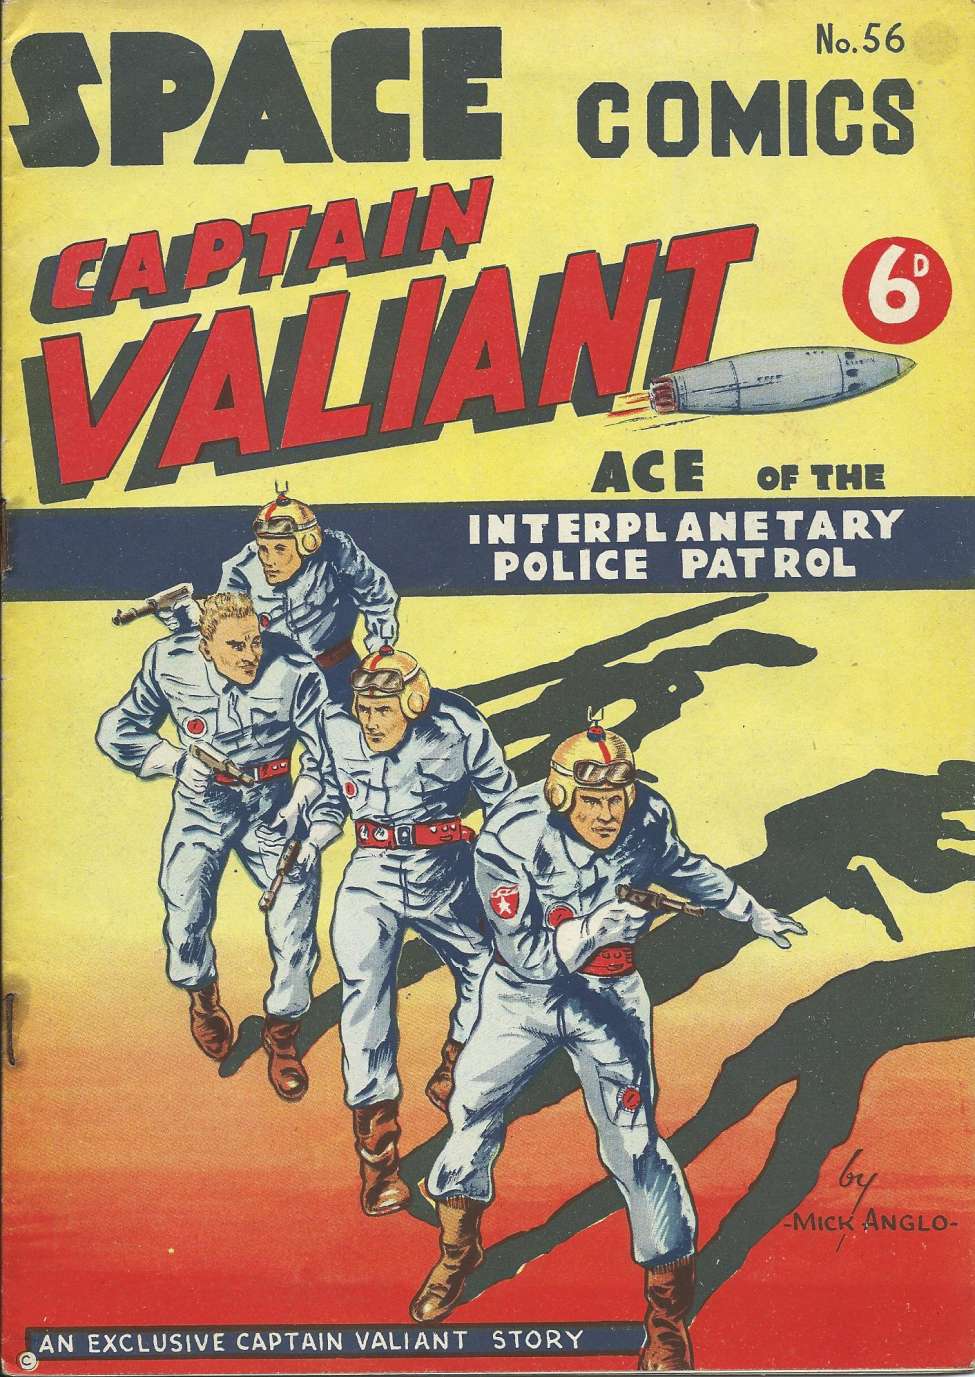 Comic Book Cover For Space Comics (Captain Valiant) 56